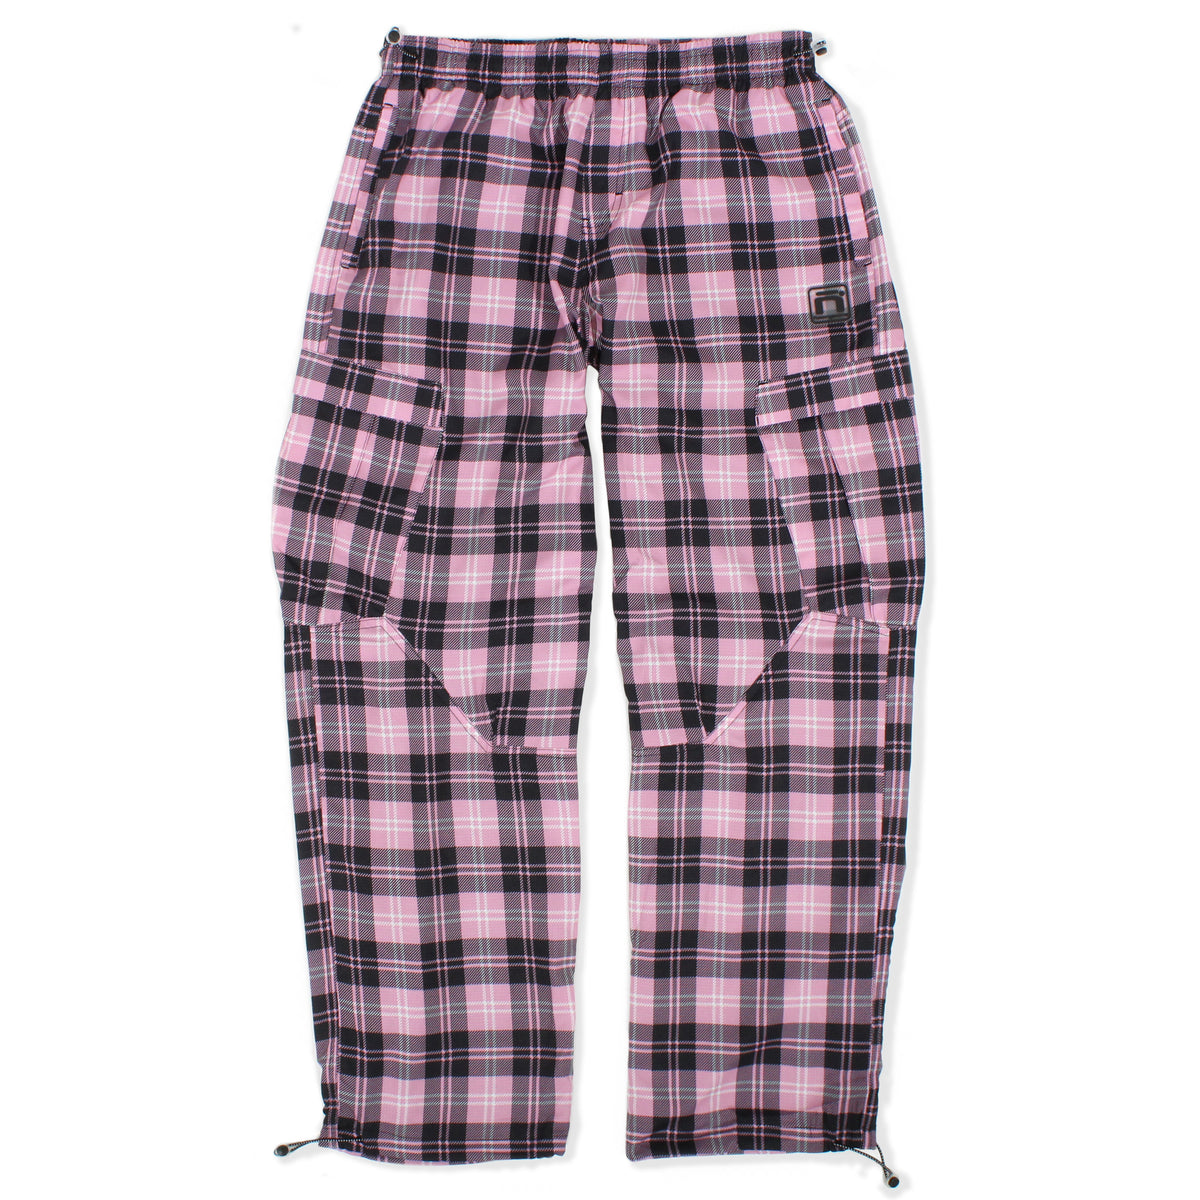 Interlude Cinch Pant - Pink